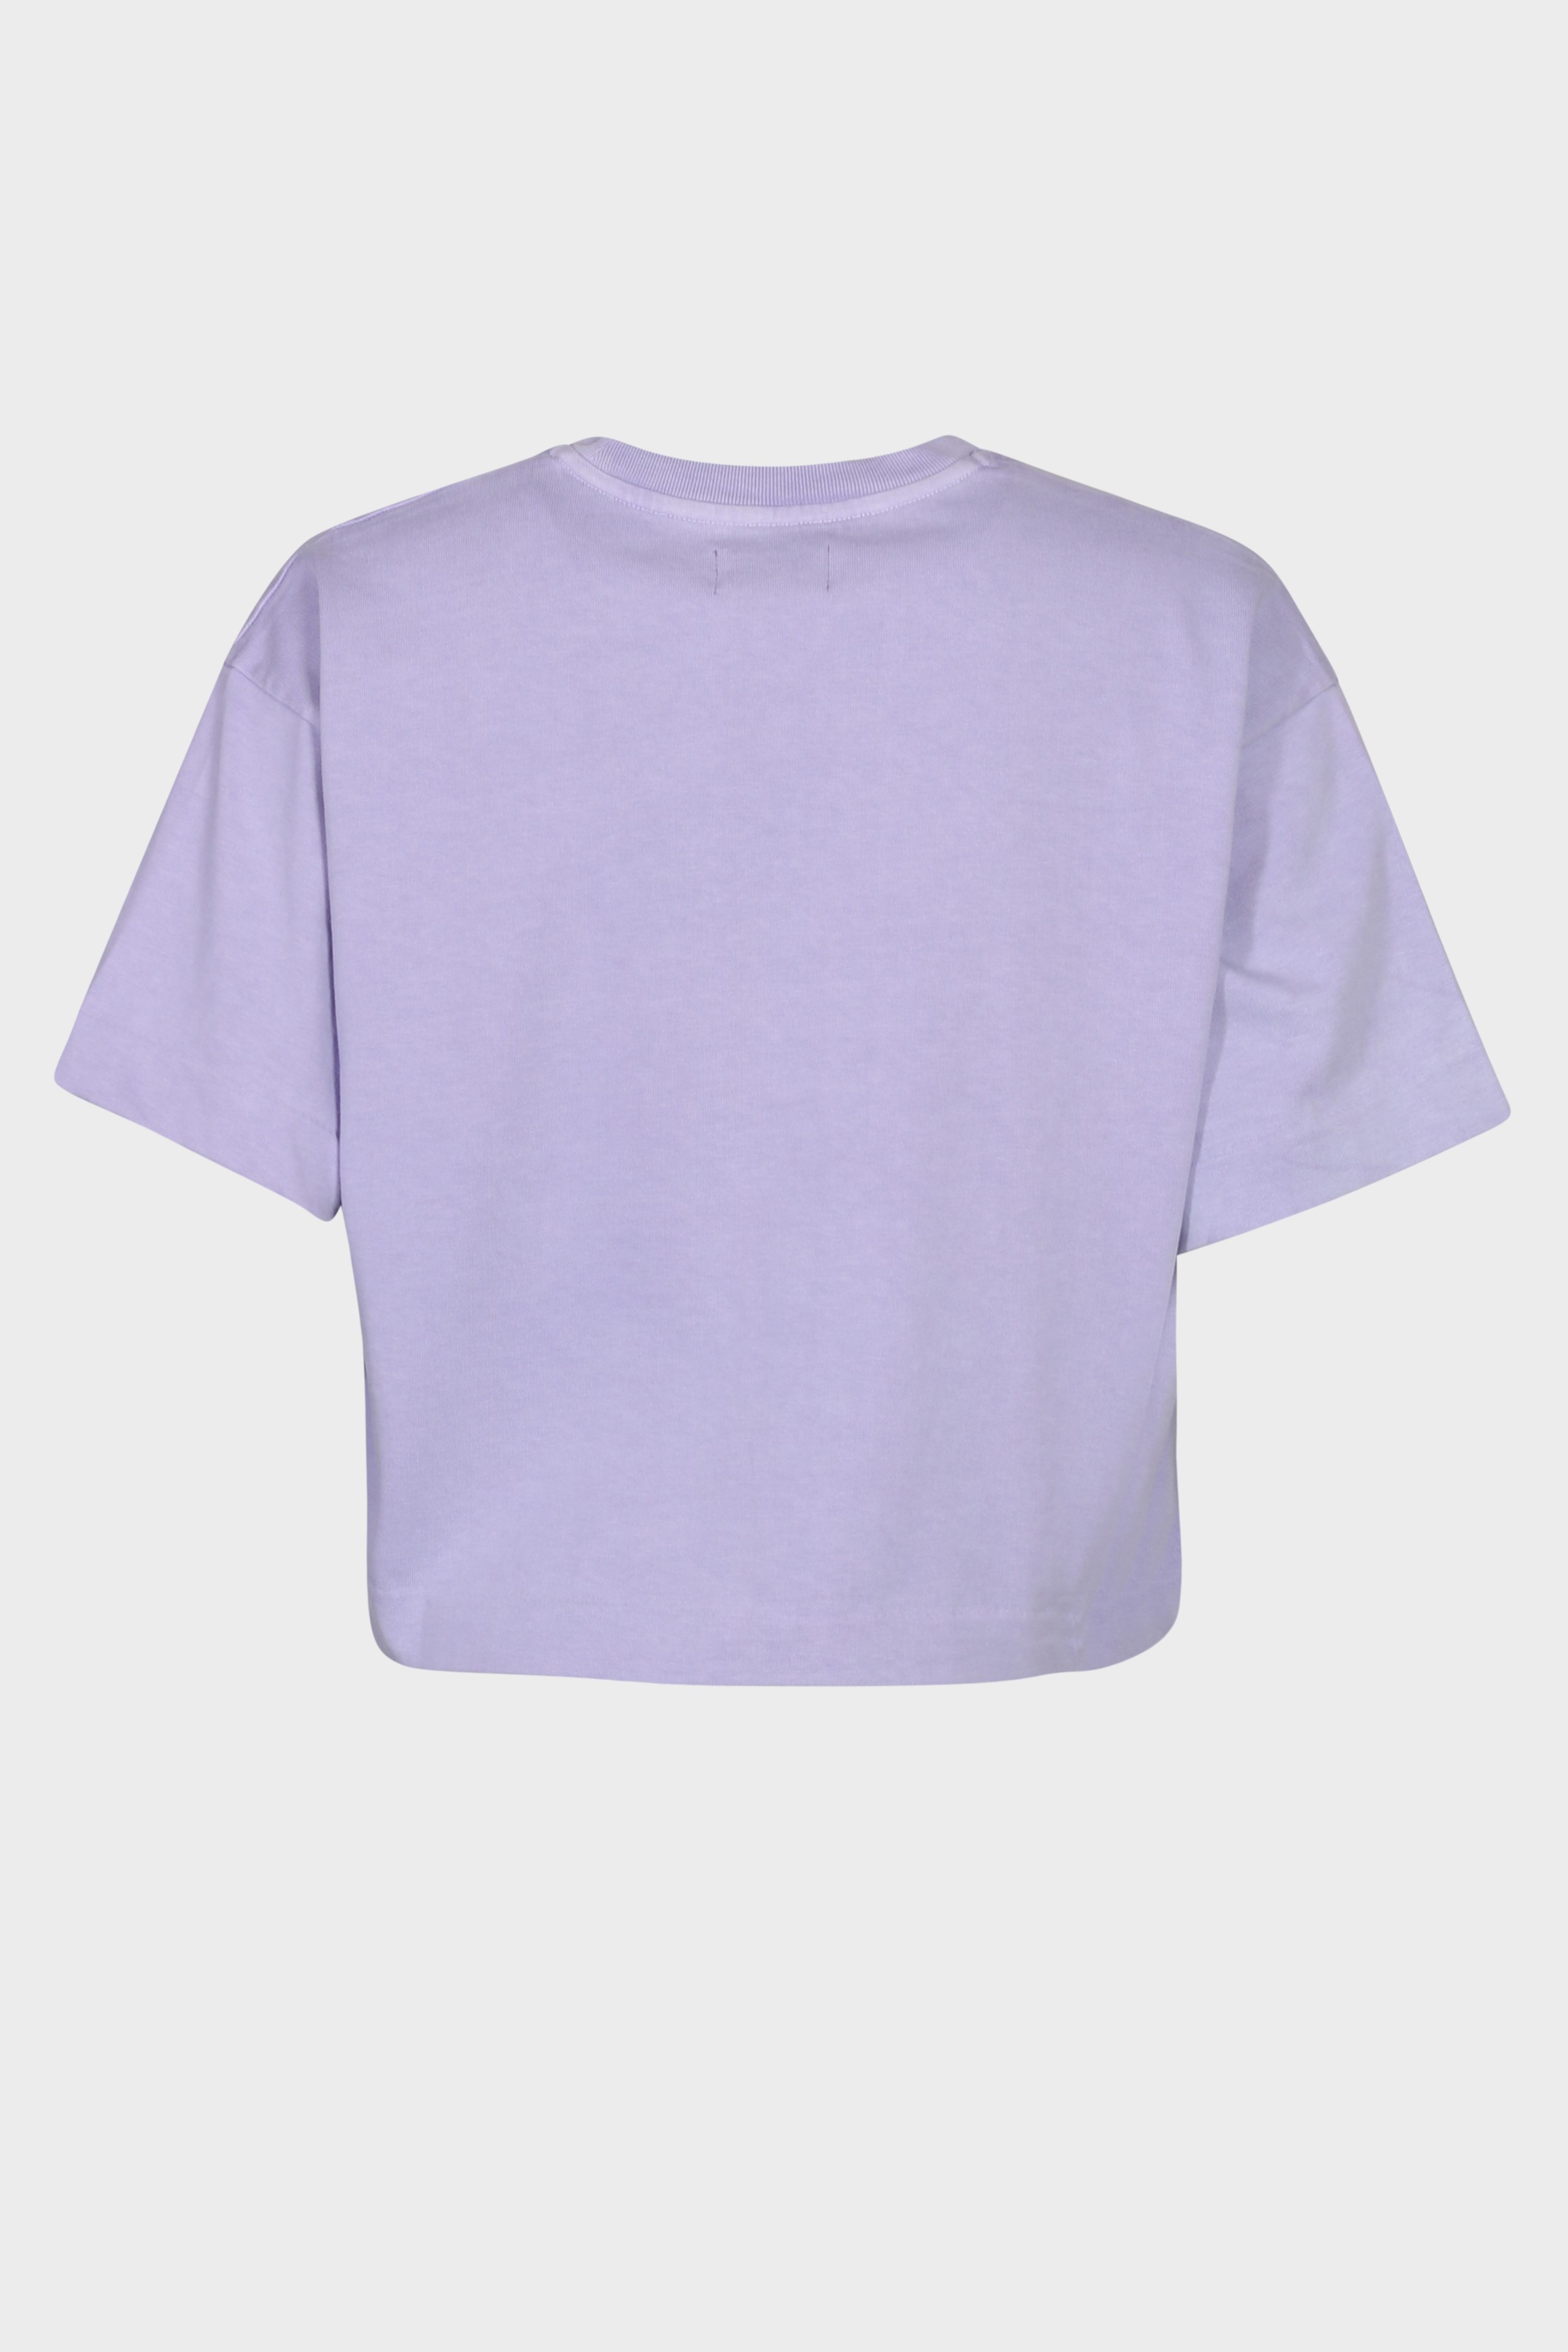 AUTRY ACTION PEOPLE Apparel T-Shirt in Lilac XL